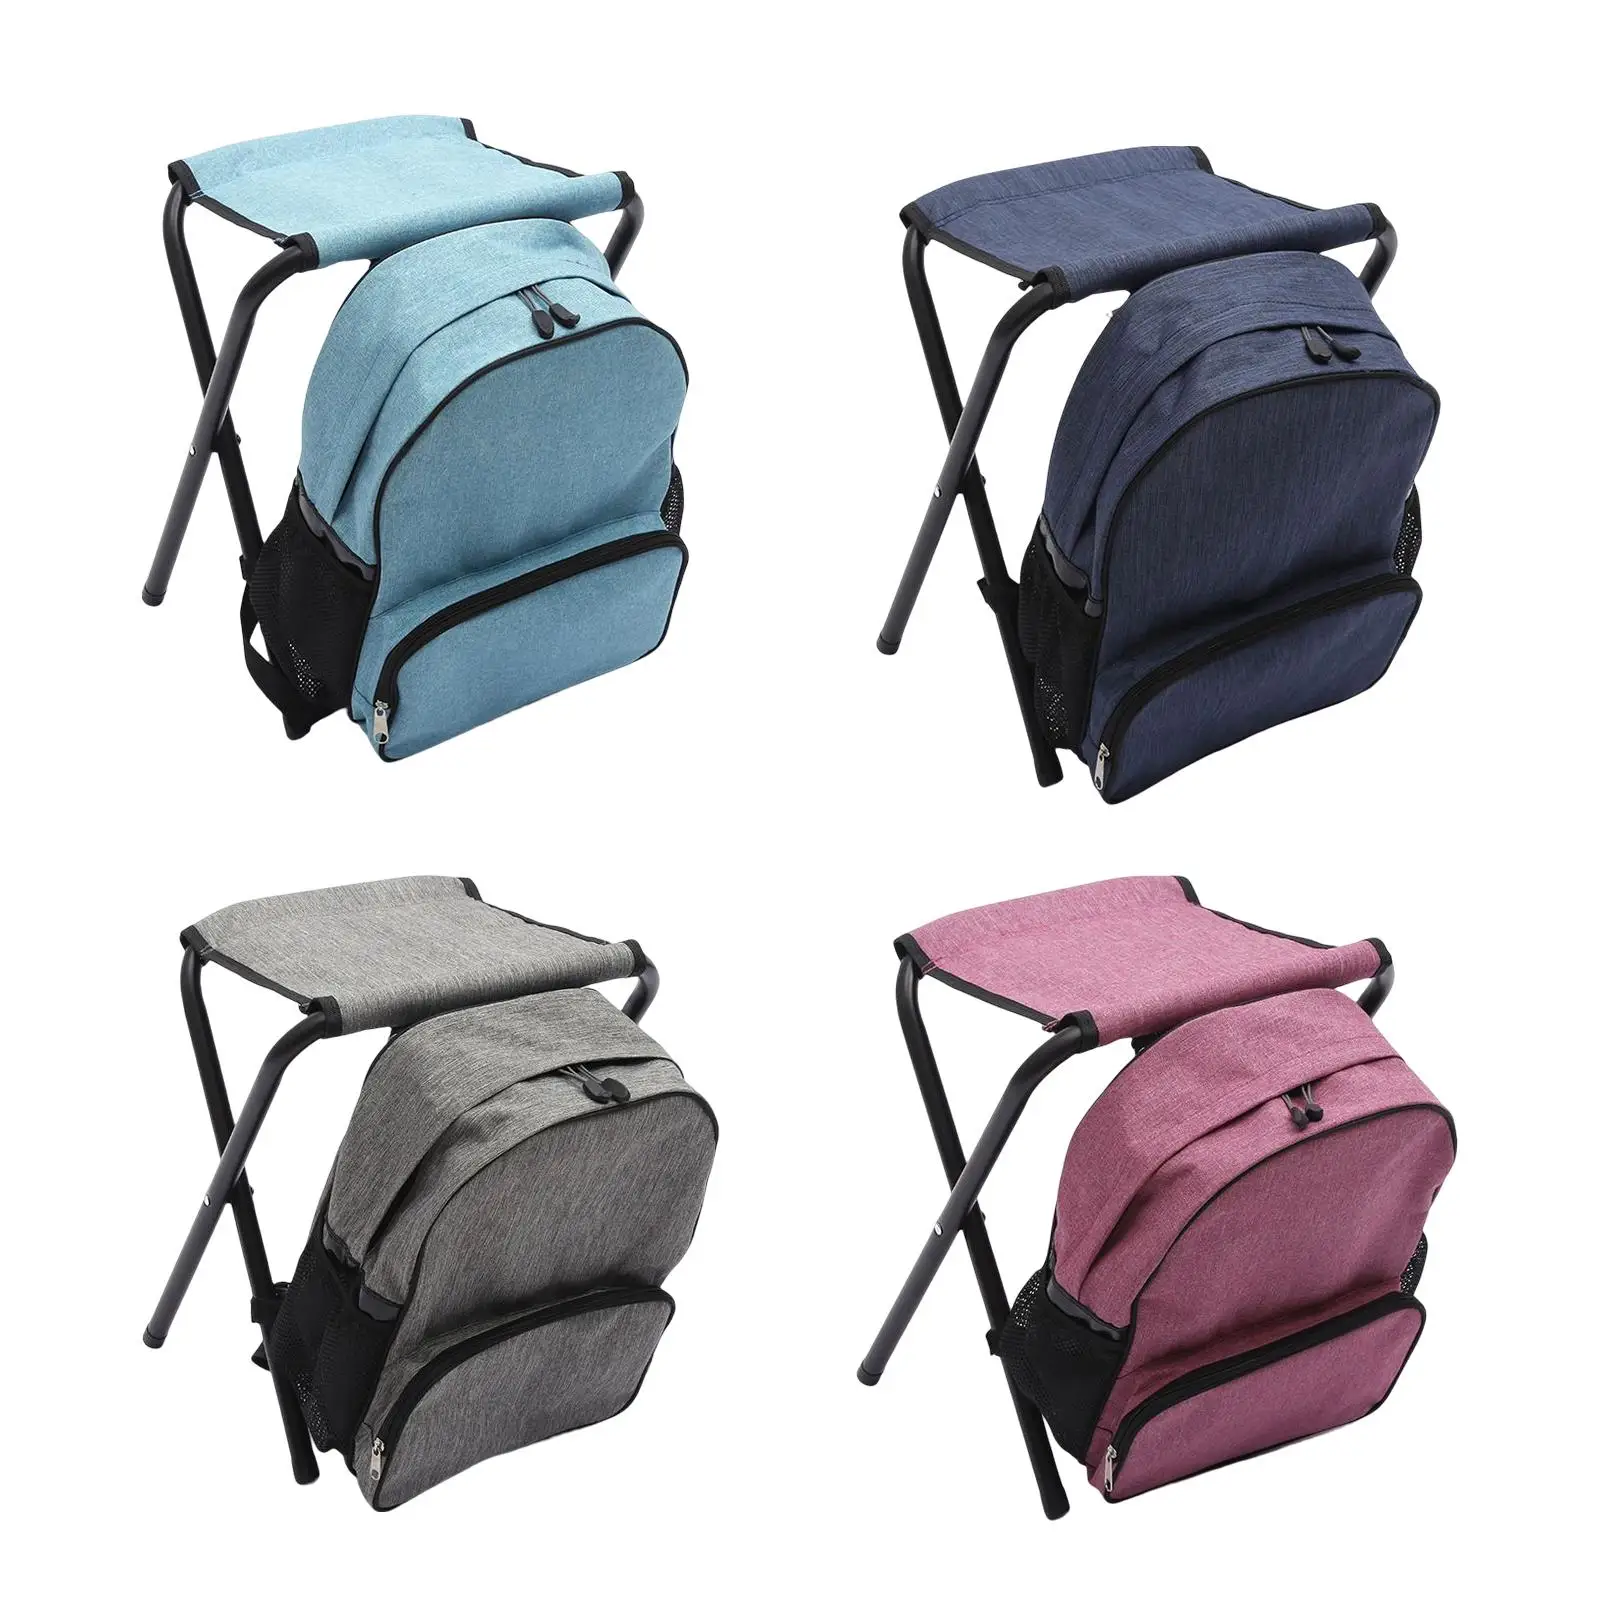 Fishing Seat Compact detachable backpack seat for hiking on the fishing beach